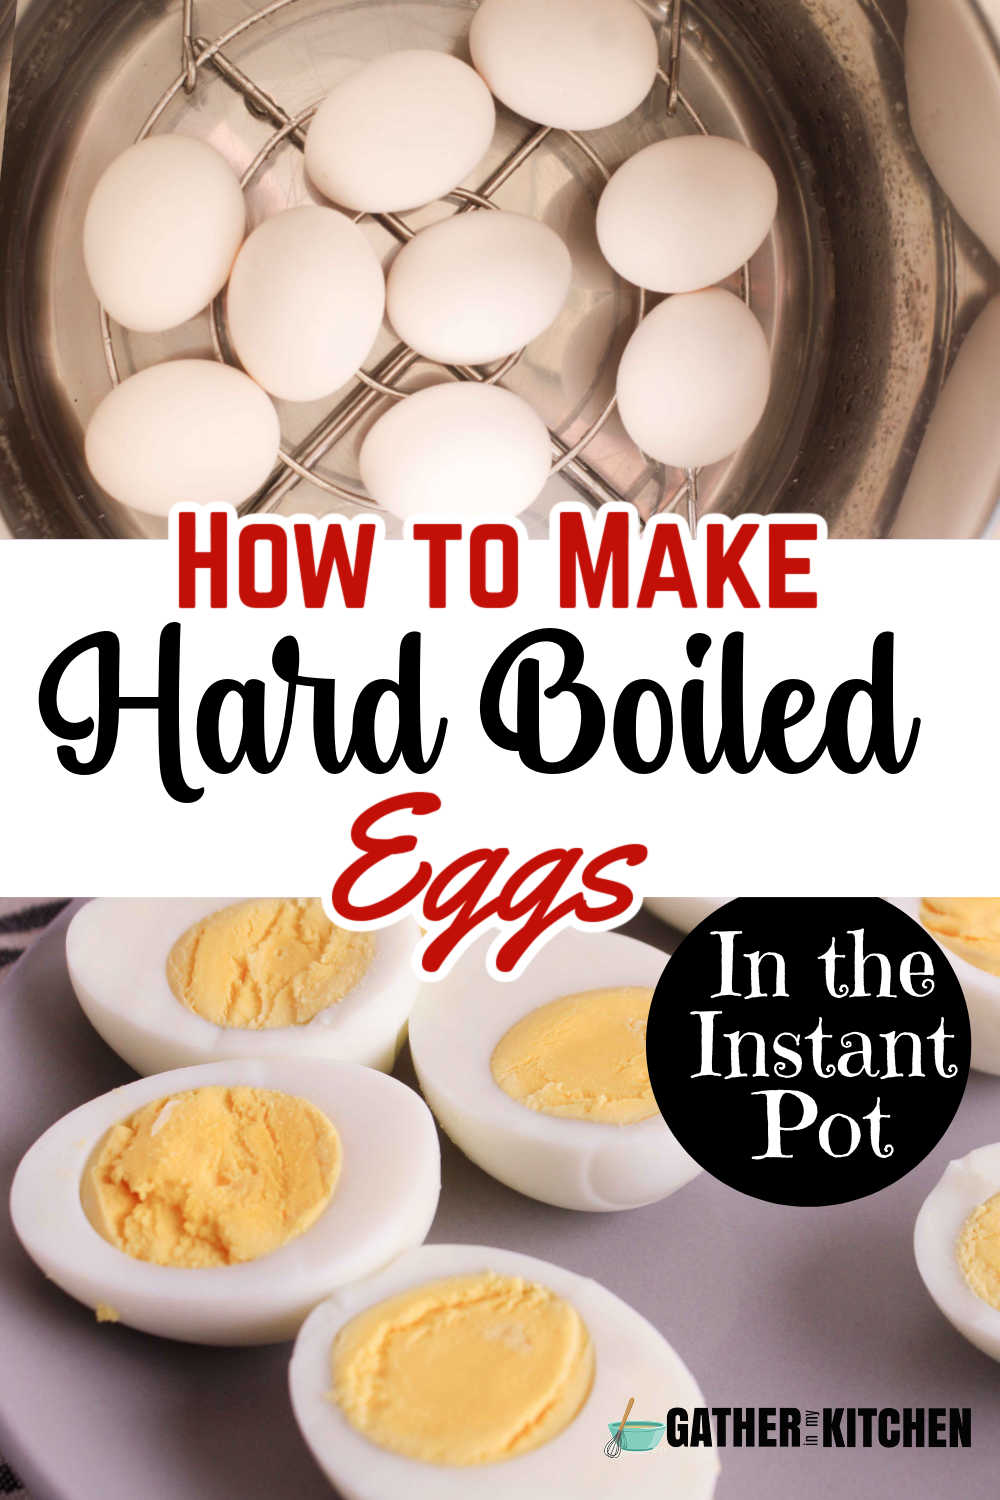 Pin image: top has eggs in the Instant Pot, middle says "How to Make Hard Boiled Eggs in the Instant Pot" and bottom has hard boiled eggs cut in half on a plate.